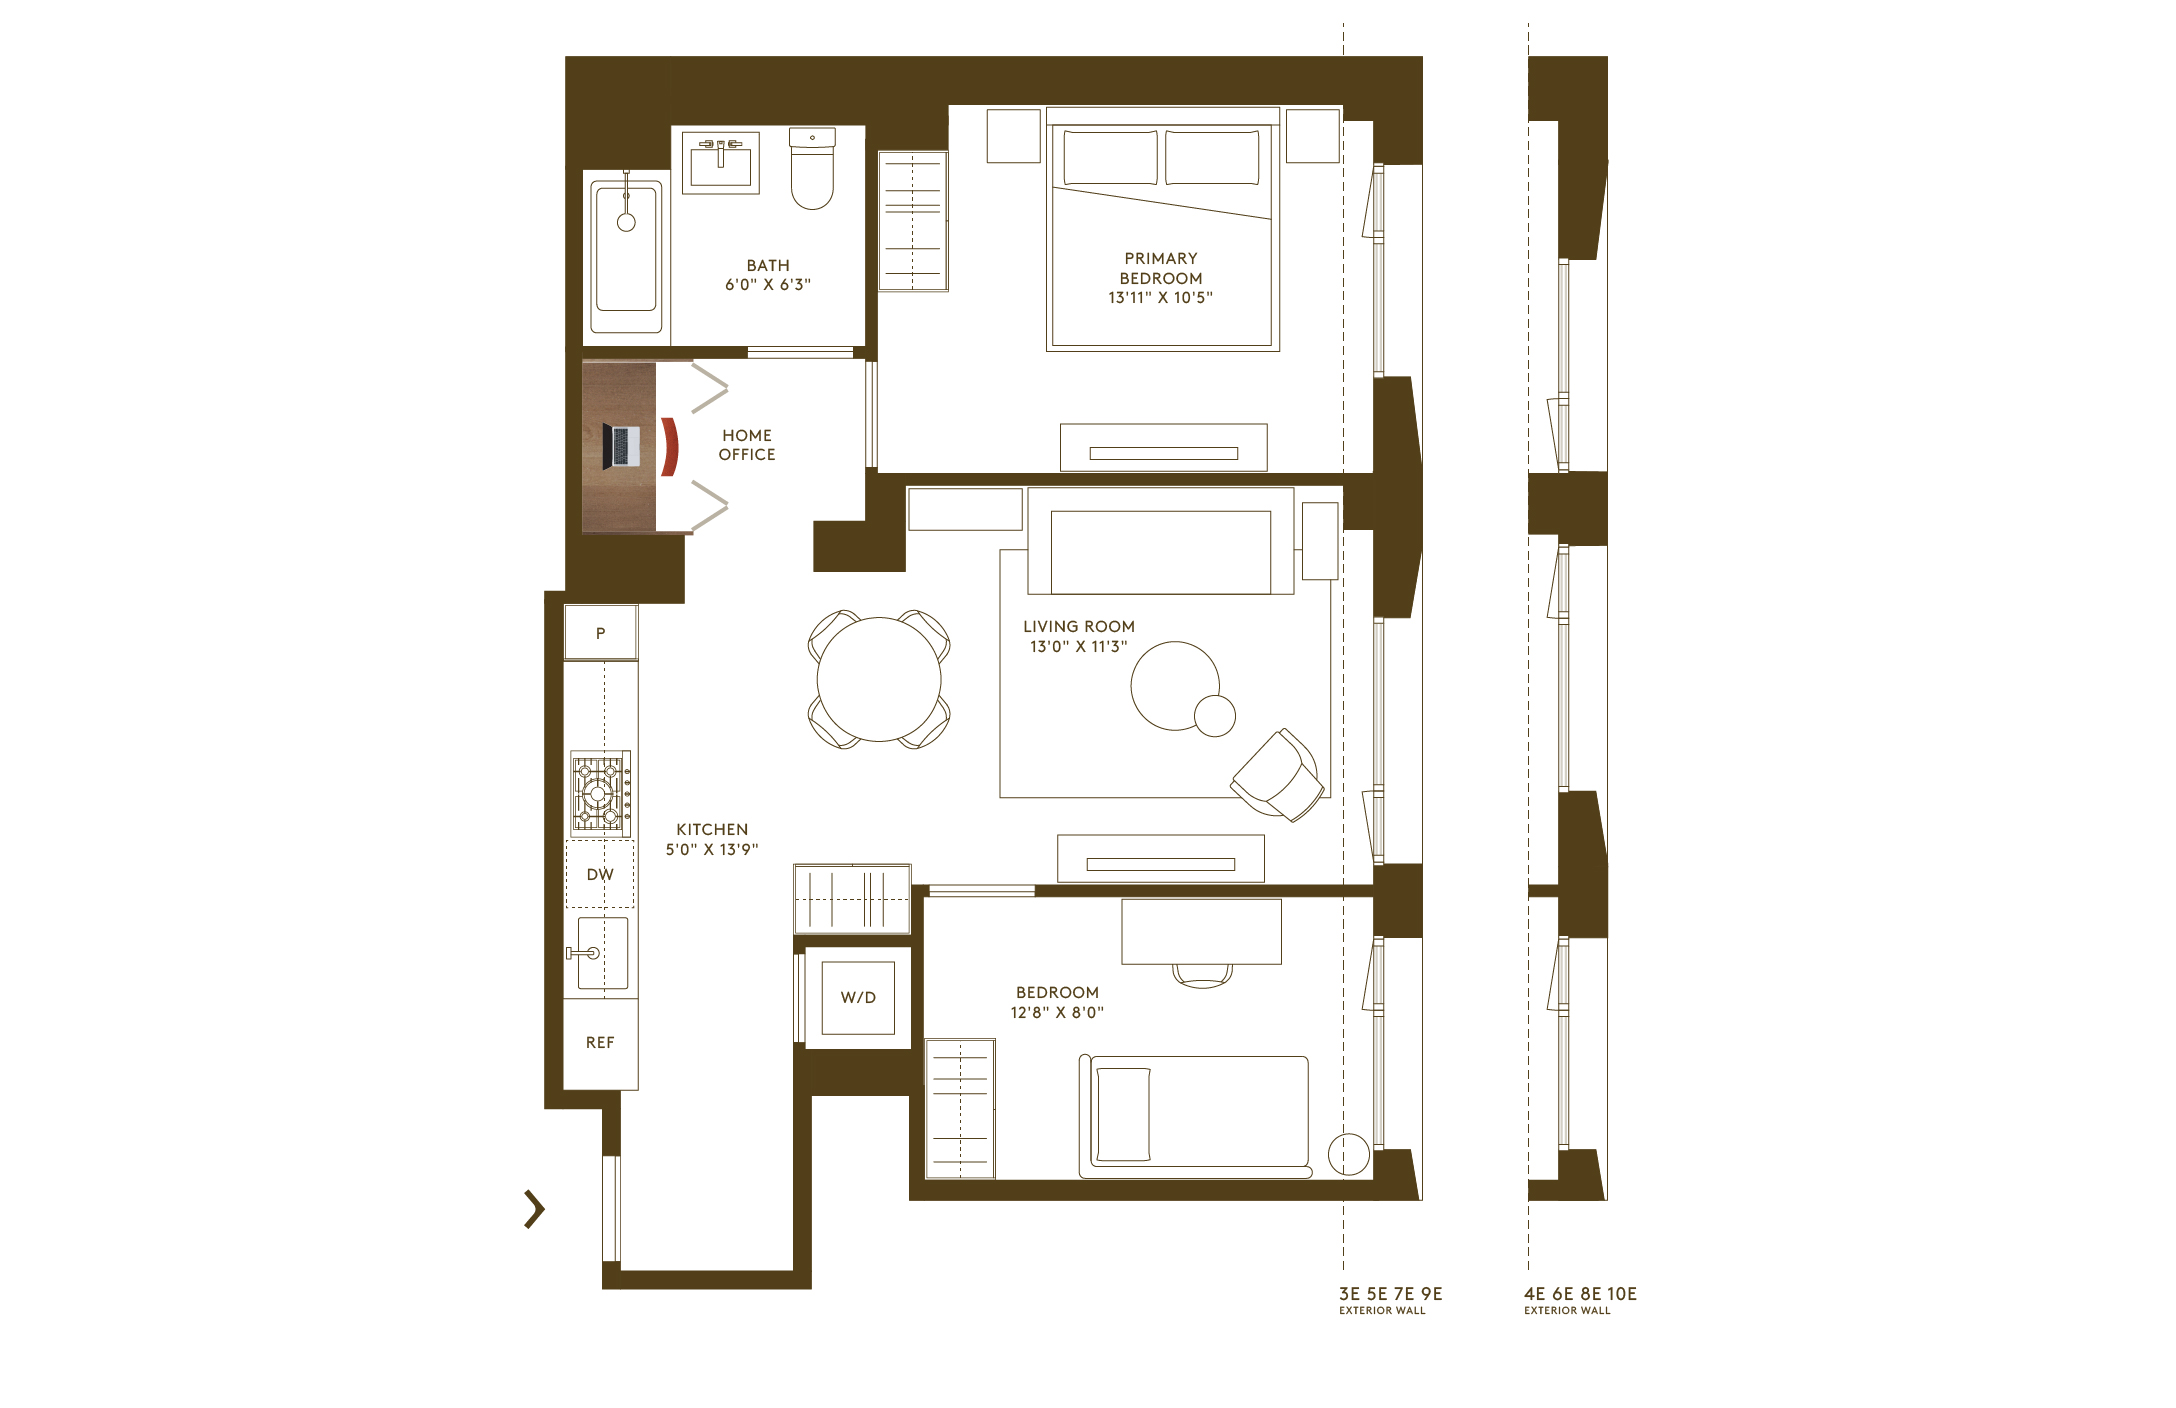 Floorplan of two-bedroom condo in Kips Bay at Hendrix House with living room, kitchen and home office.